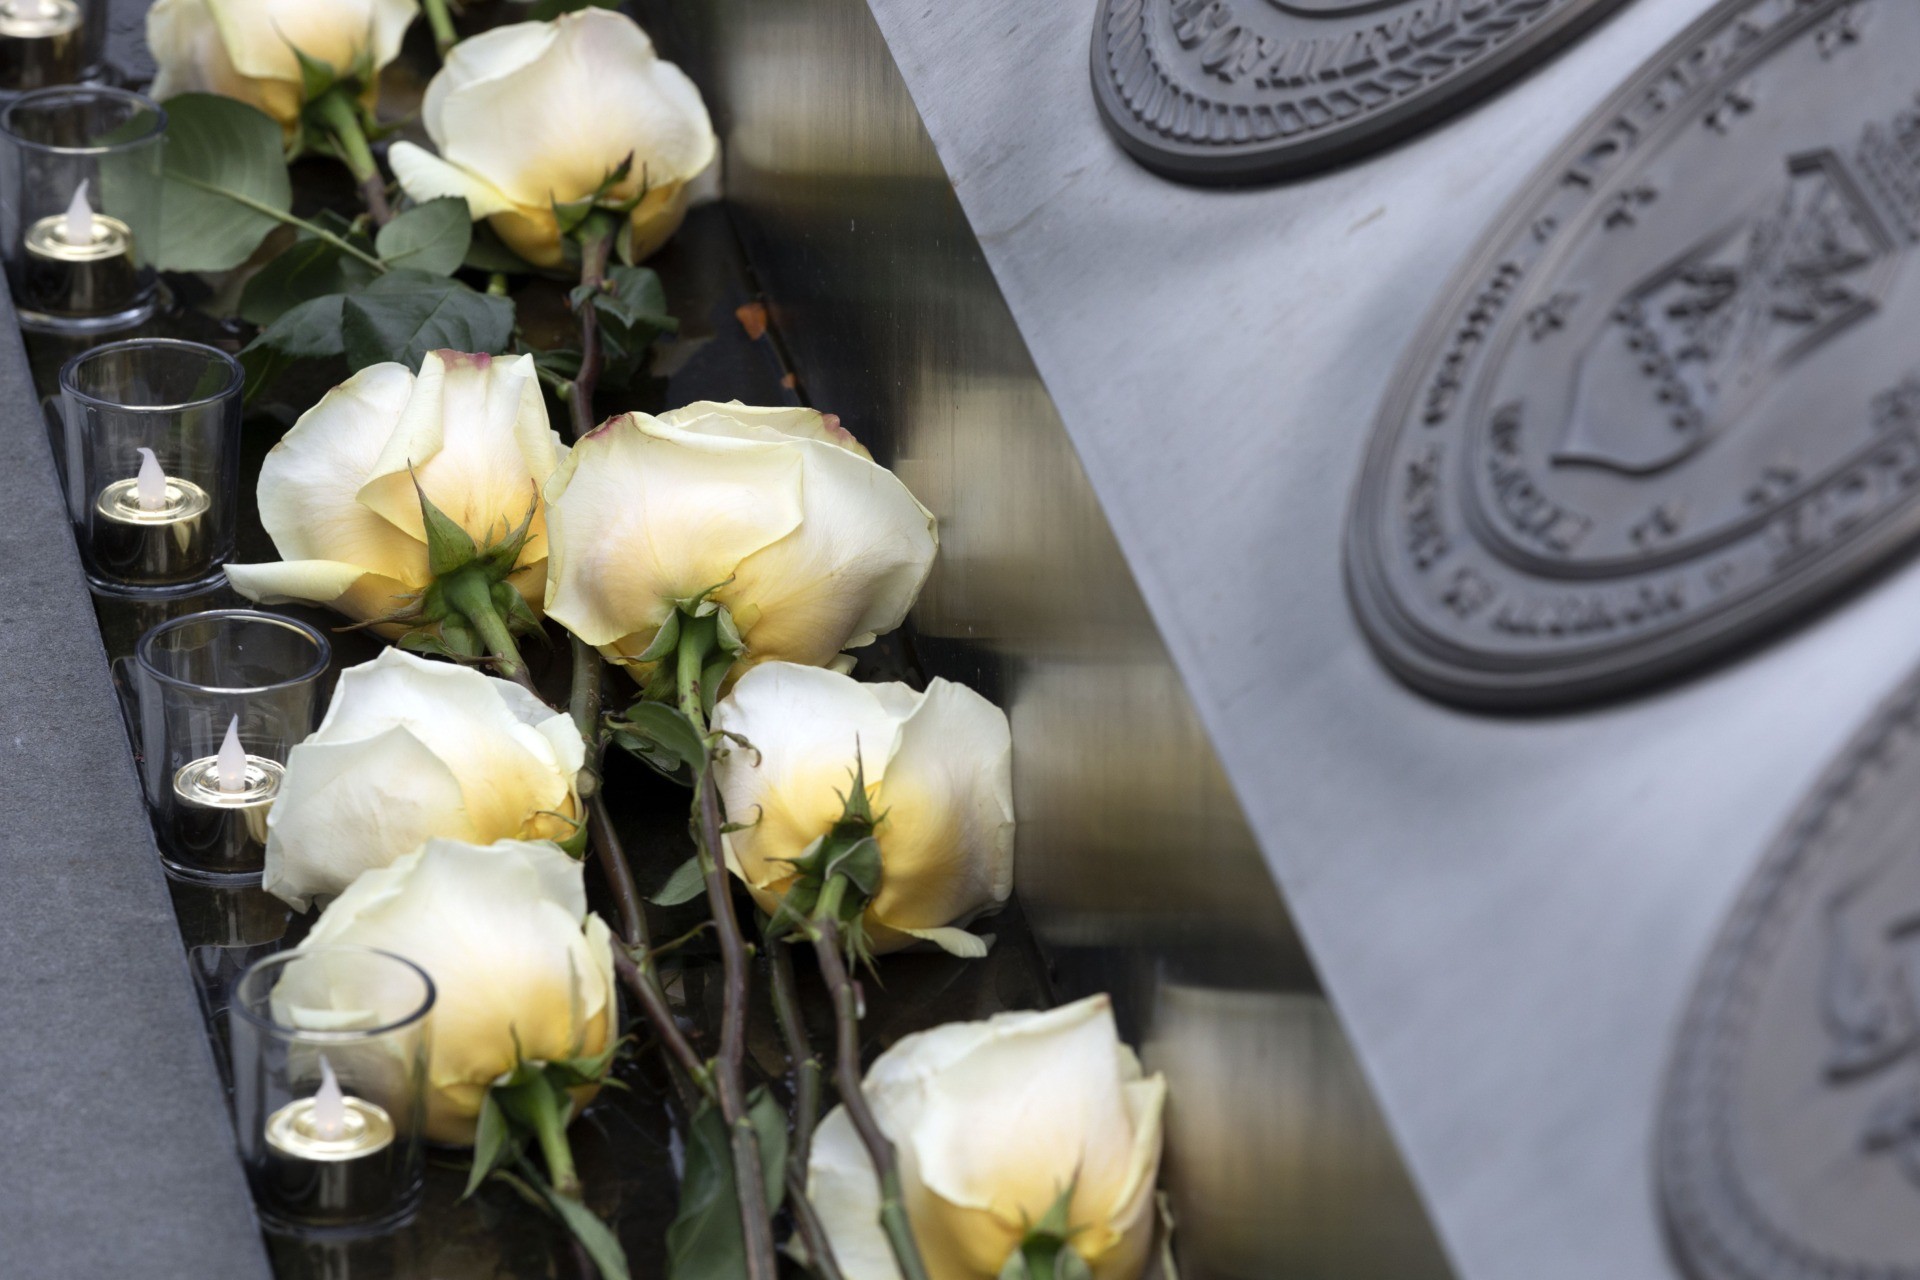 Roses and candles lie at the Massachusetts Fallen Heroes Memorial, Saturday after being placed during a ceremony, Aug. 28, 2021, in Boston. The ceremony was held to honor the U.S. service members killed in a suicide bombing at the airport in Kabul, Afghanistan, including Marine Sgt. Johanny Rosario Pichardo of Lawrence, Mass. (AP Photo/Michael Dwyer)